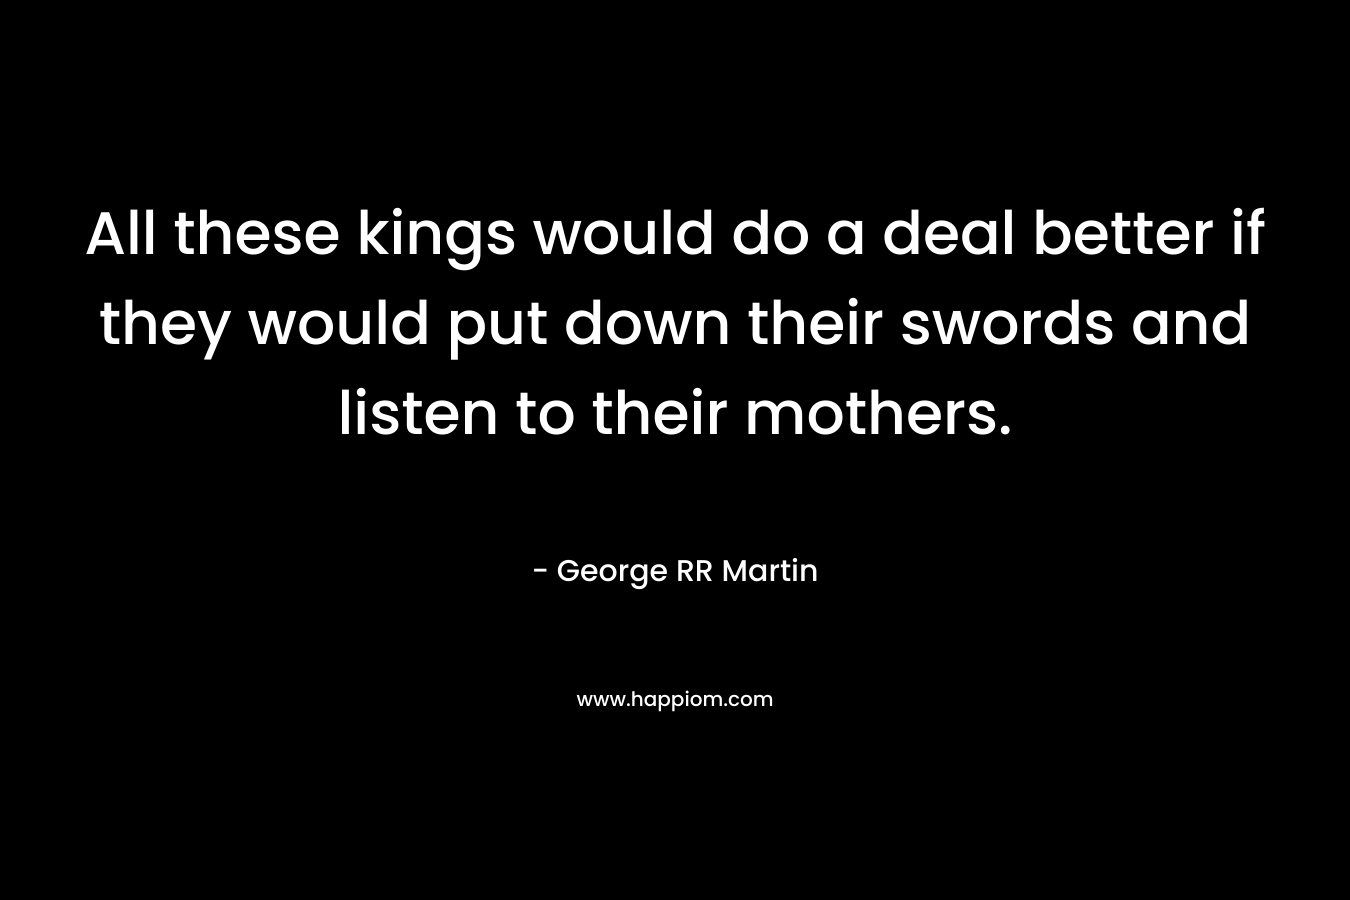 All these kings would do a deal better if they would put down their swords and listen to their mothers. – George RR Martin